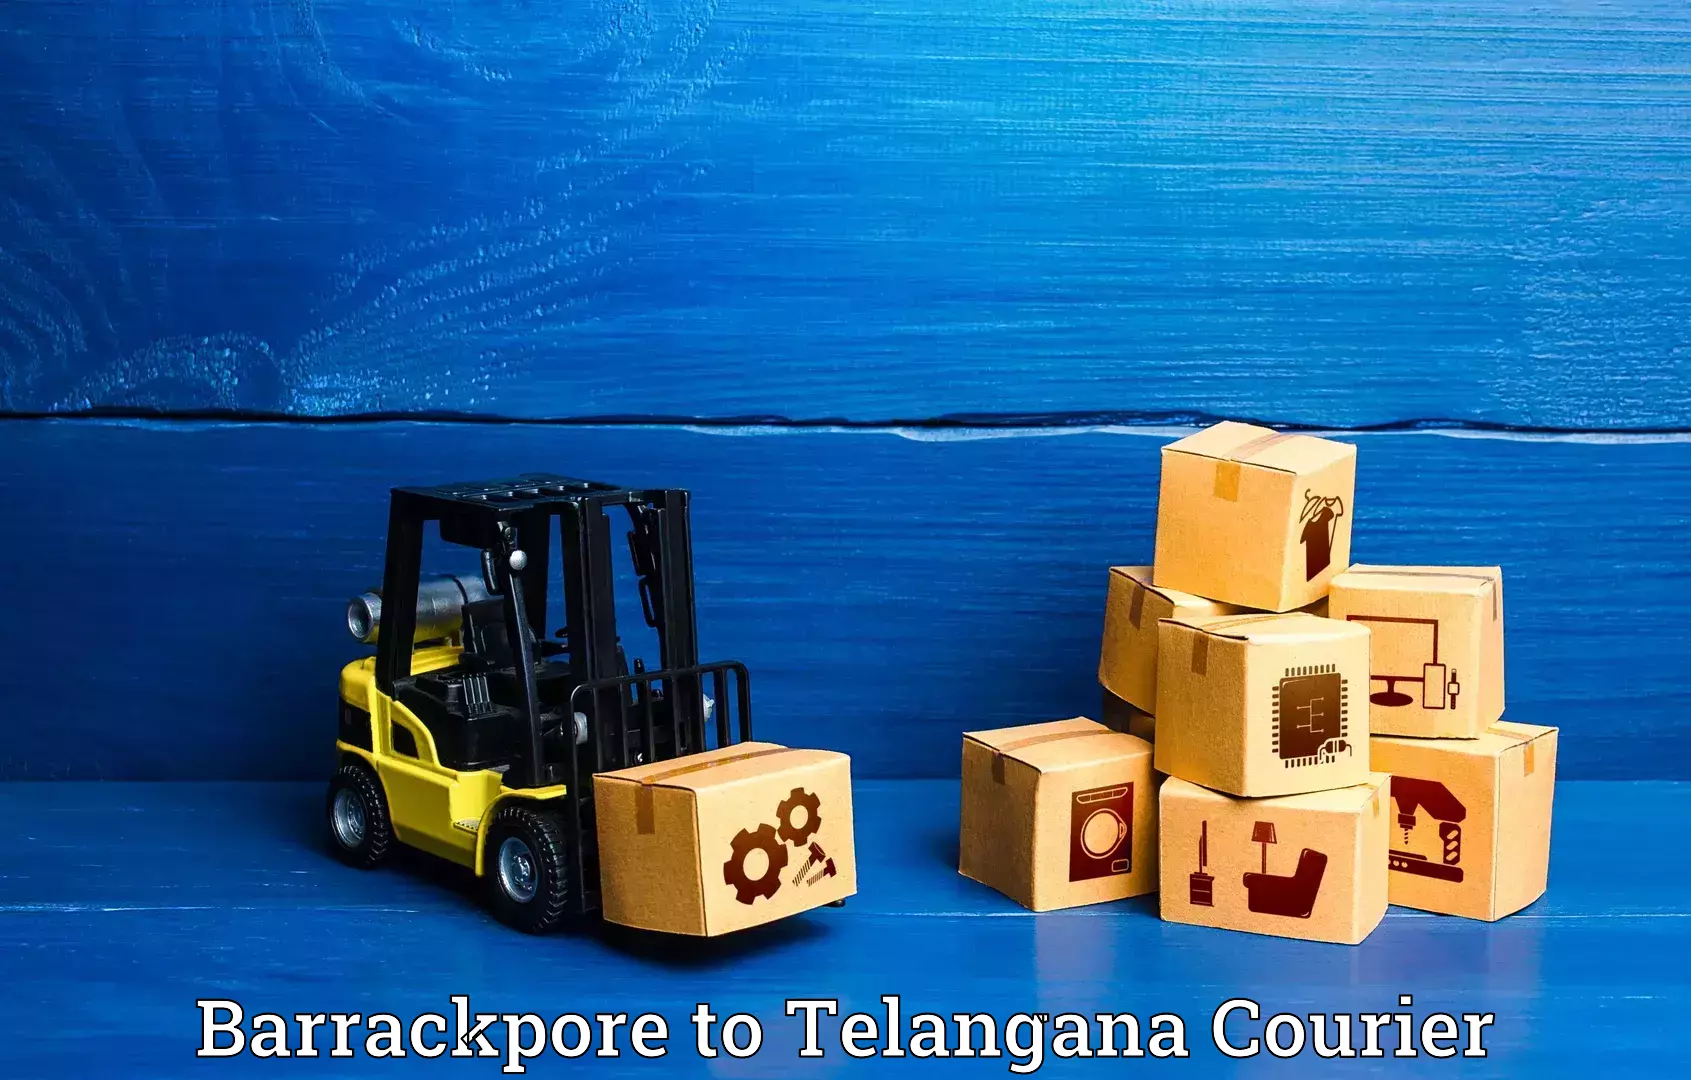 Weekend baggage shipping in Barrackpore to Cheyyur